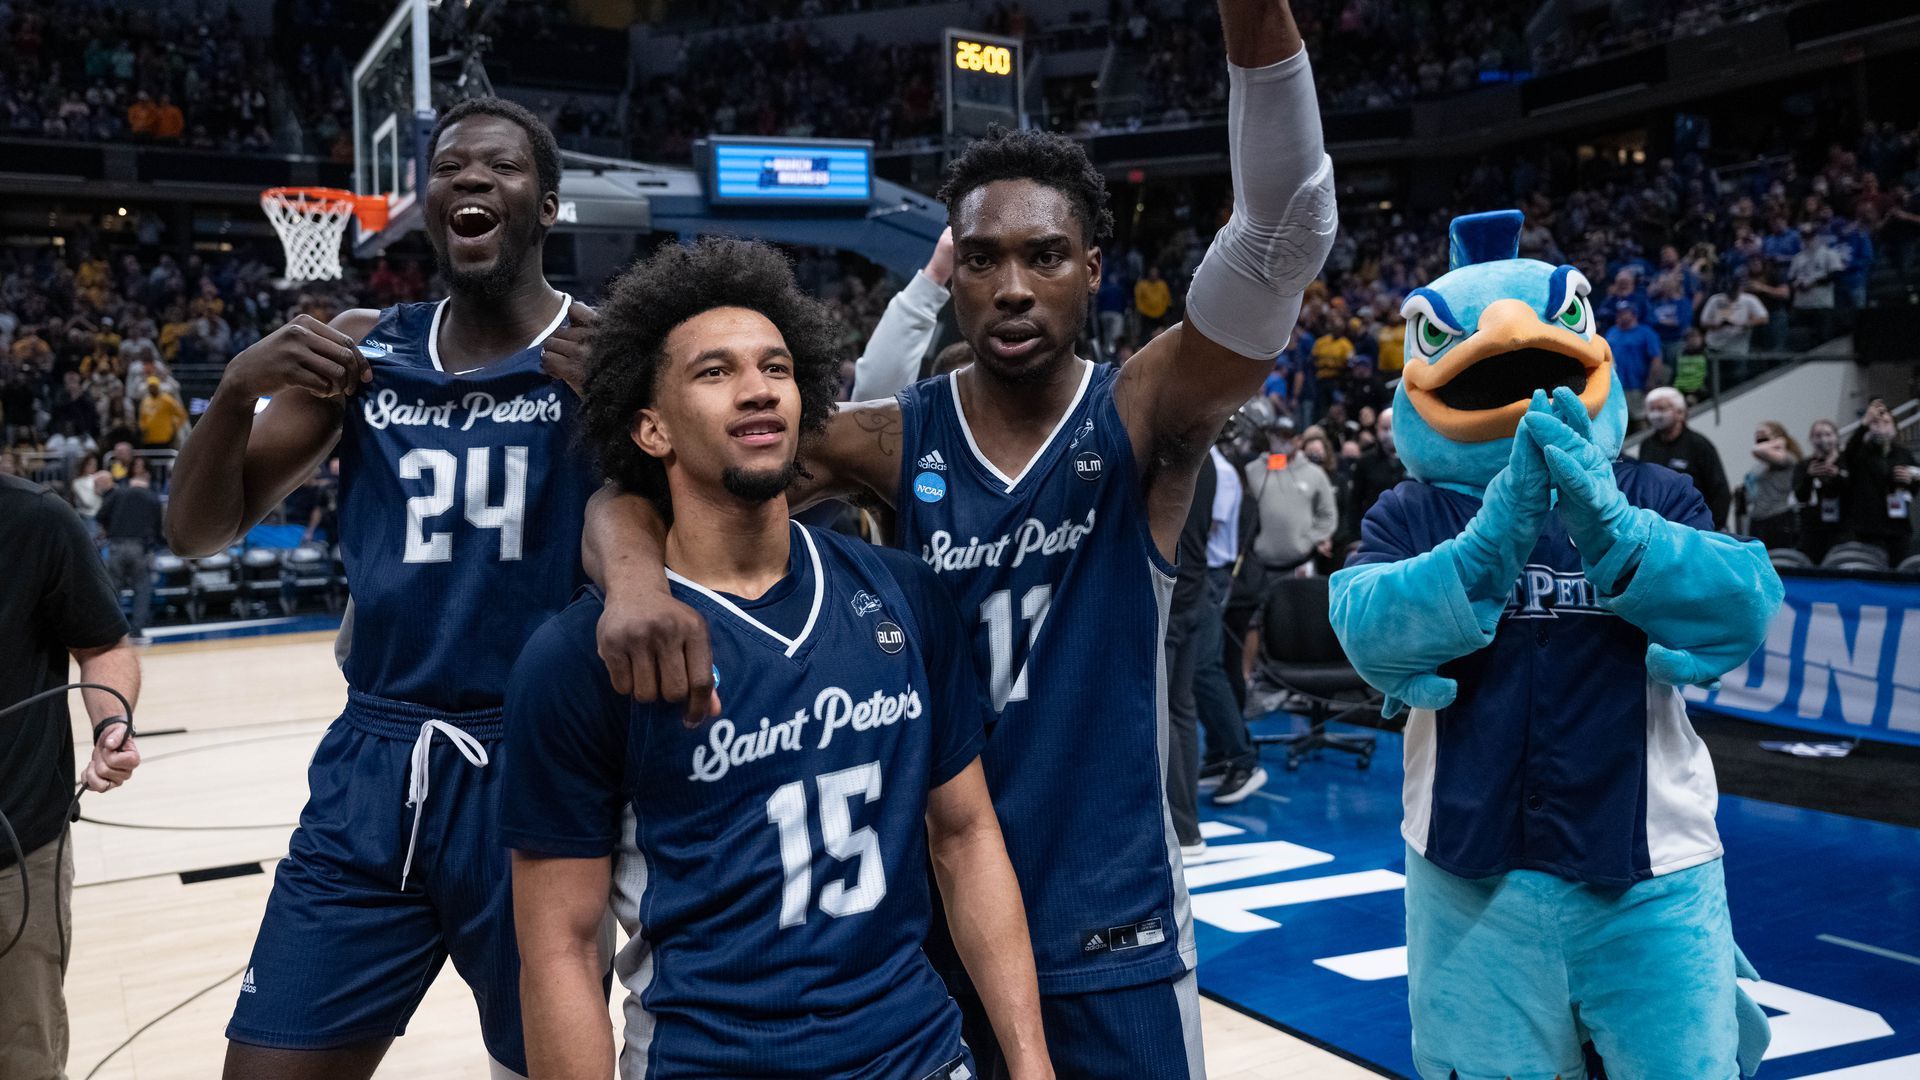 Saint Peter's players celebrating their victory over Kentucky on March 17.